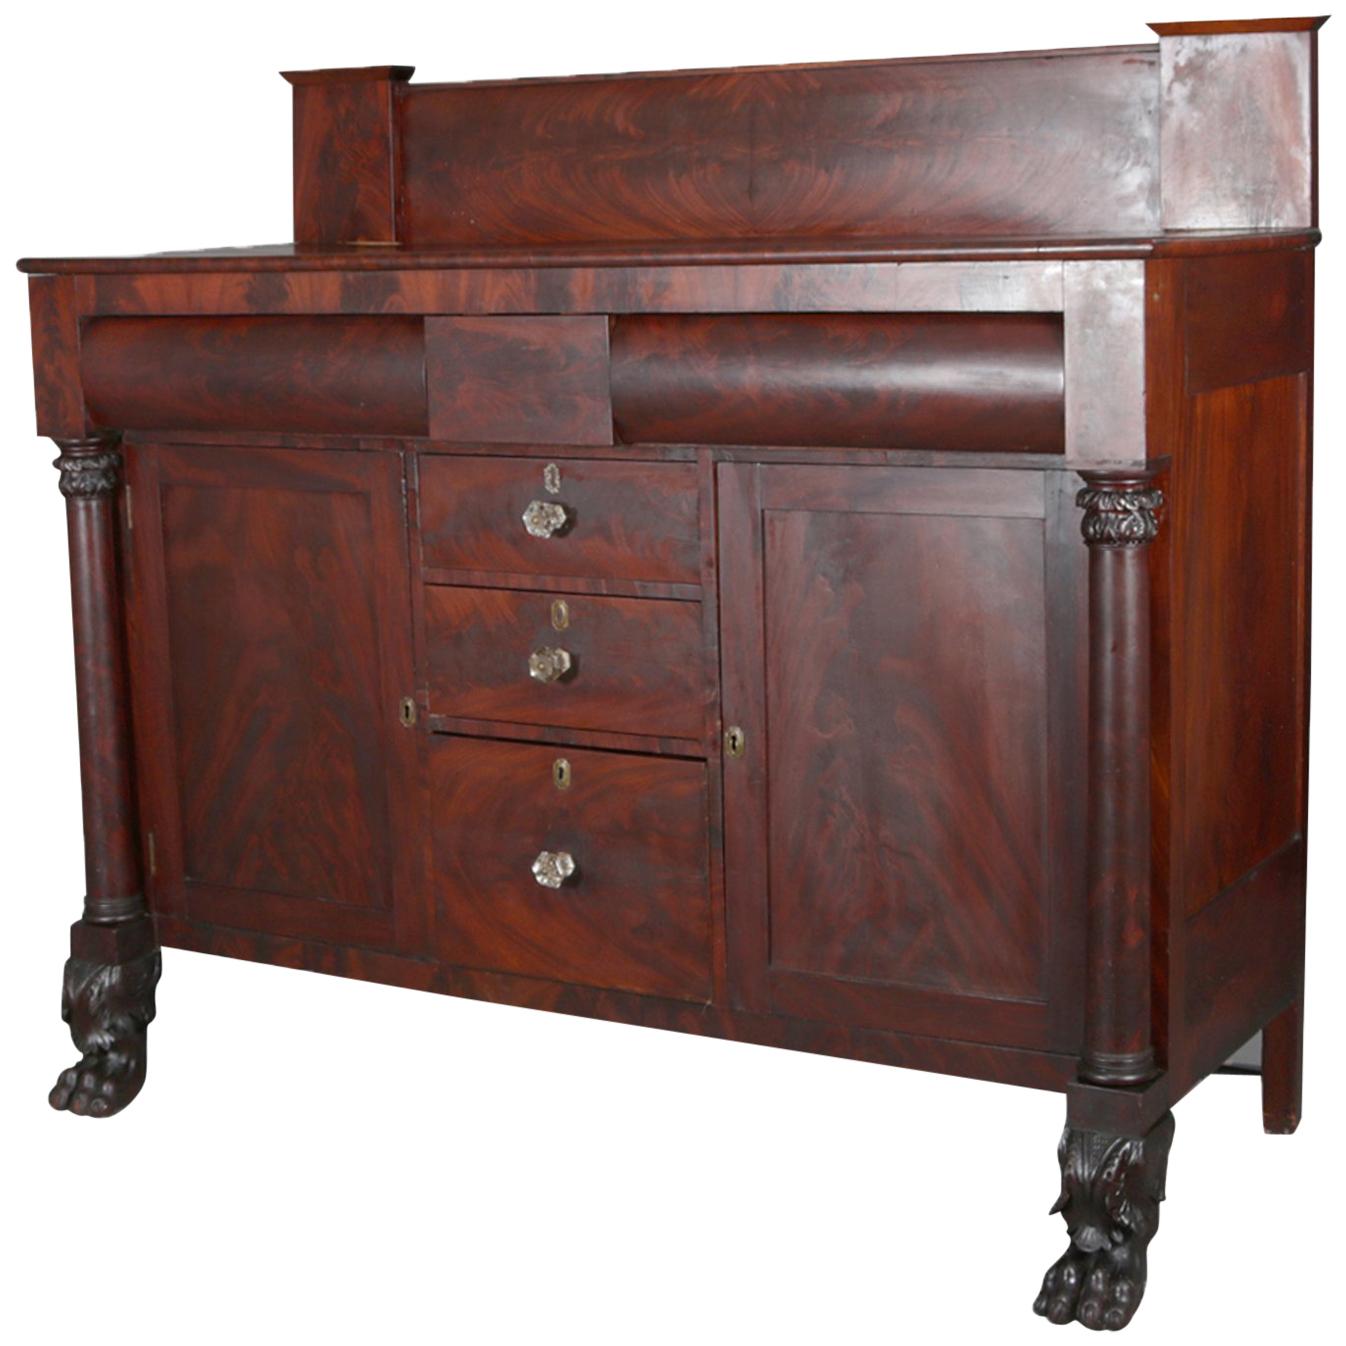 Antique Classical American Empire Carved Flame Mahogany Sideboard, circa 1830